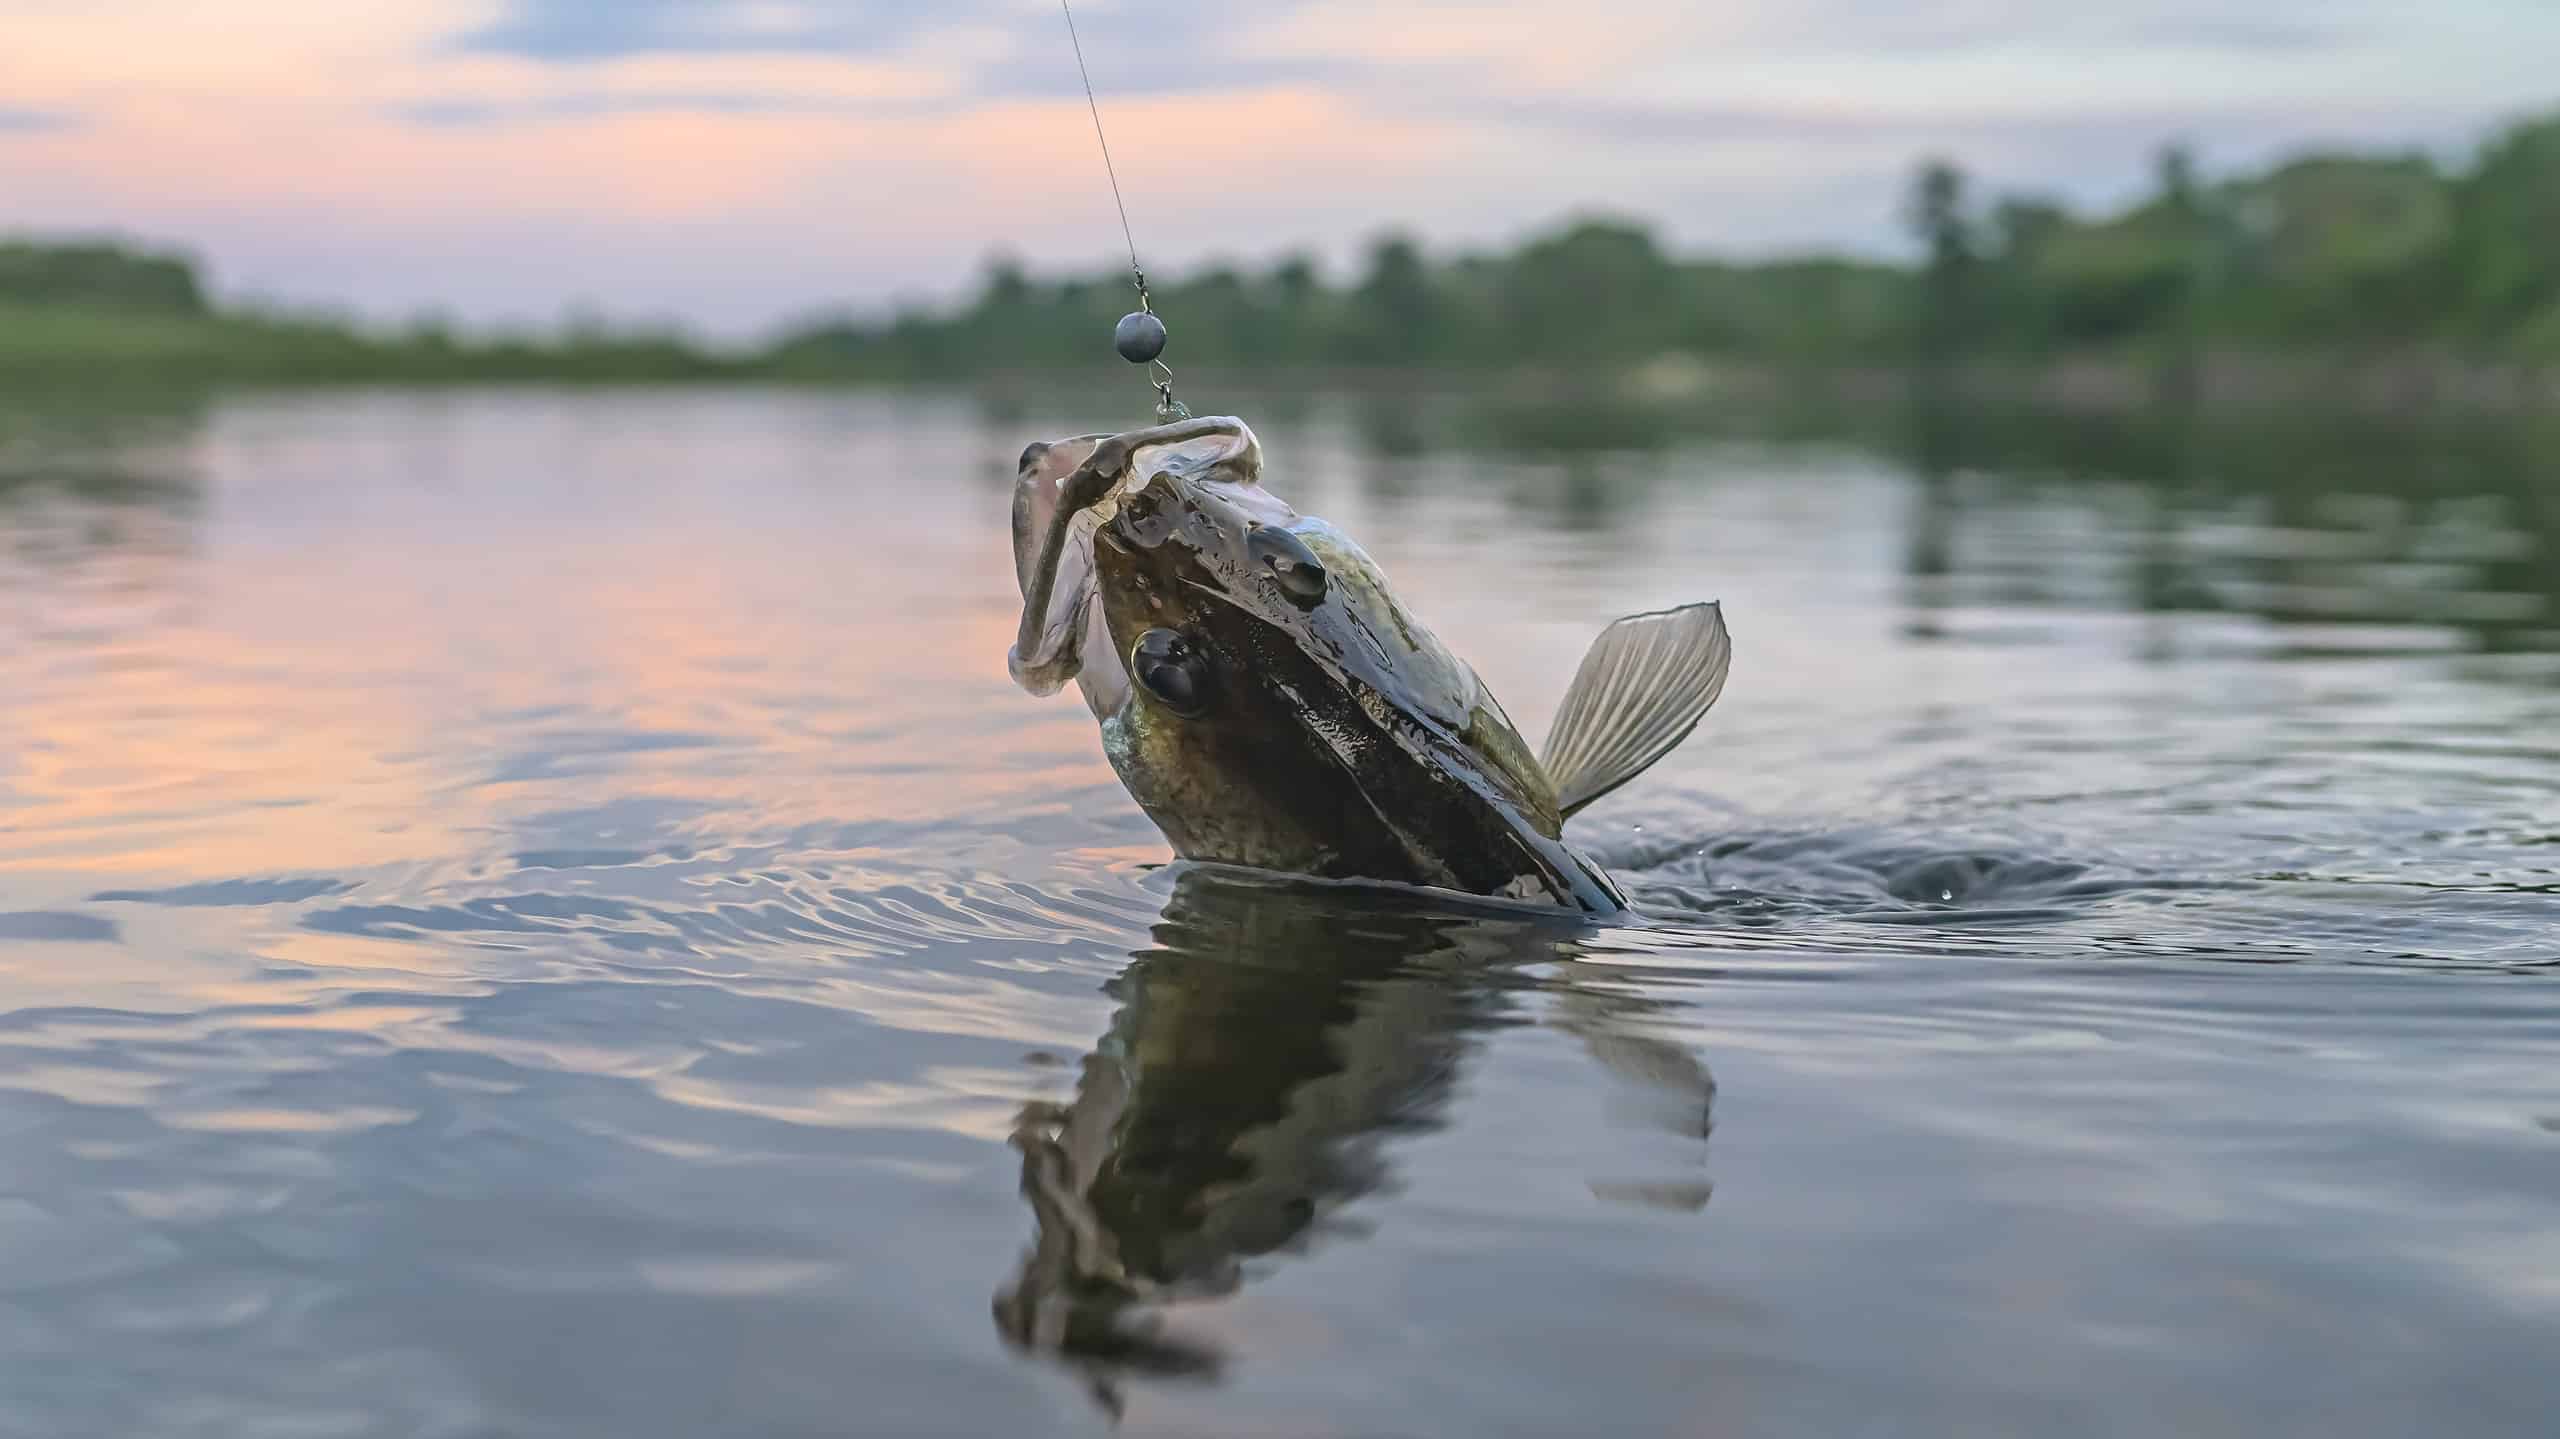 Walleye are among the most popular gamefish in North America.